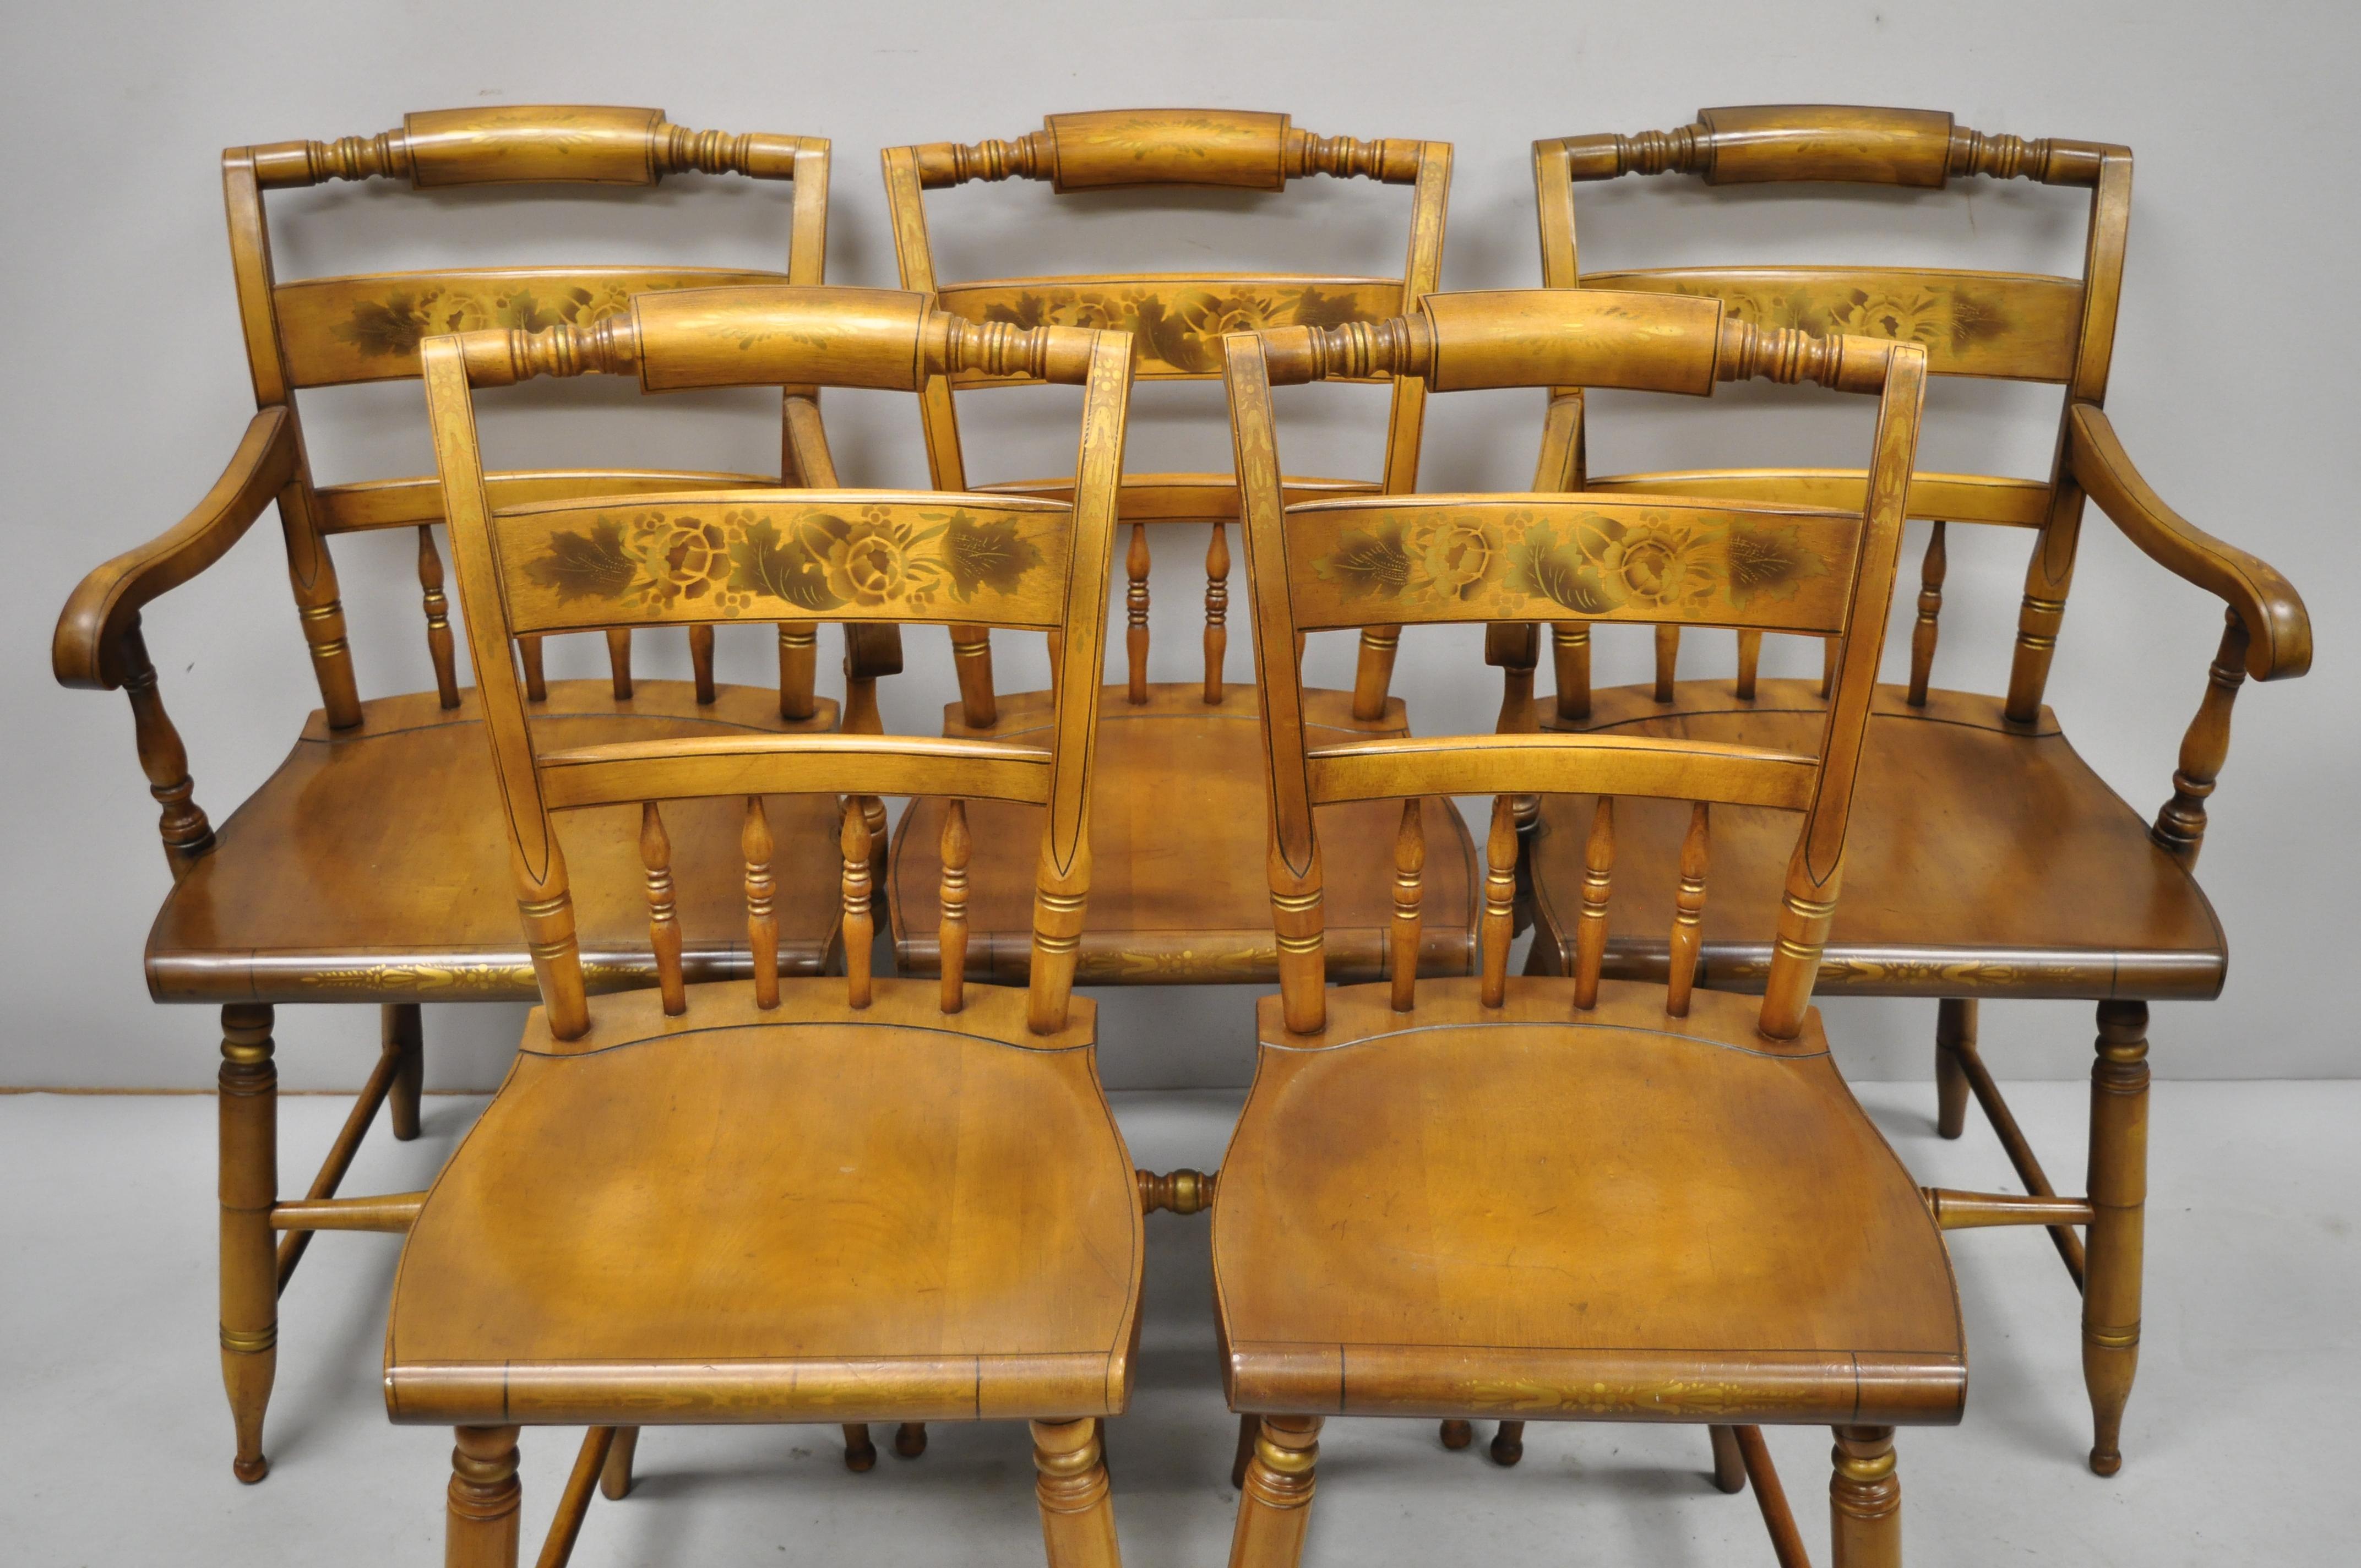 Set of 6 vintage L. Hitchcock Stenciled Farmhouse Harvest dining chairs. Listing includes (2) armchairs, (4) side chairs, solid wood construction, beautiful wood grain, original signature, very nice antique item, quality American craftsmanship,